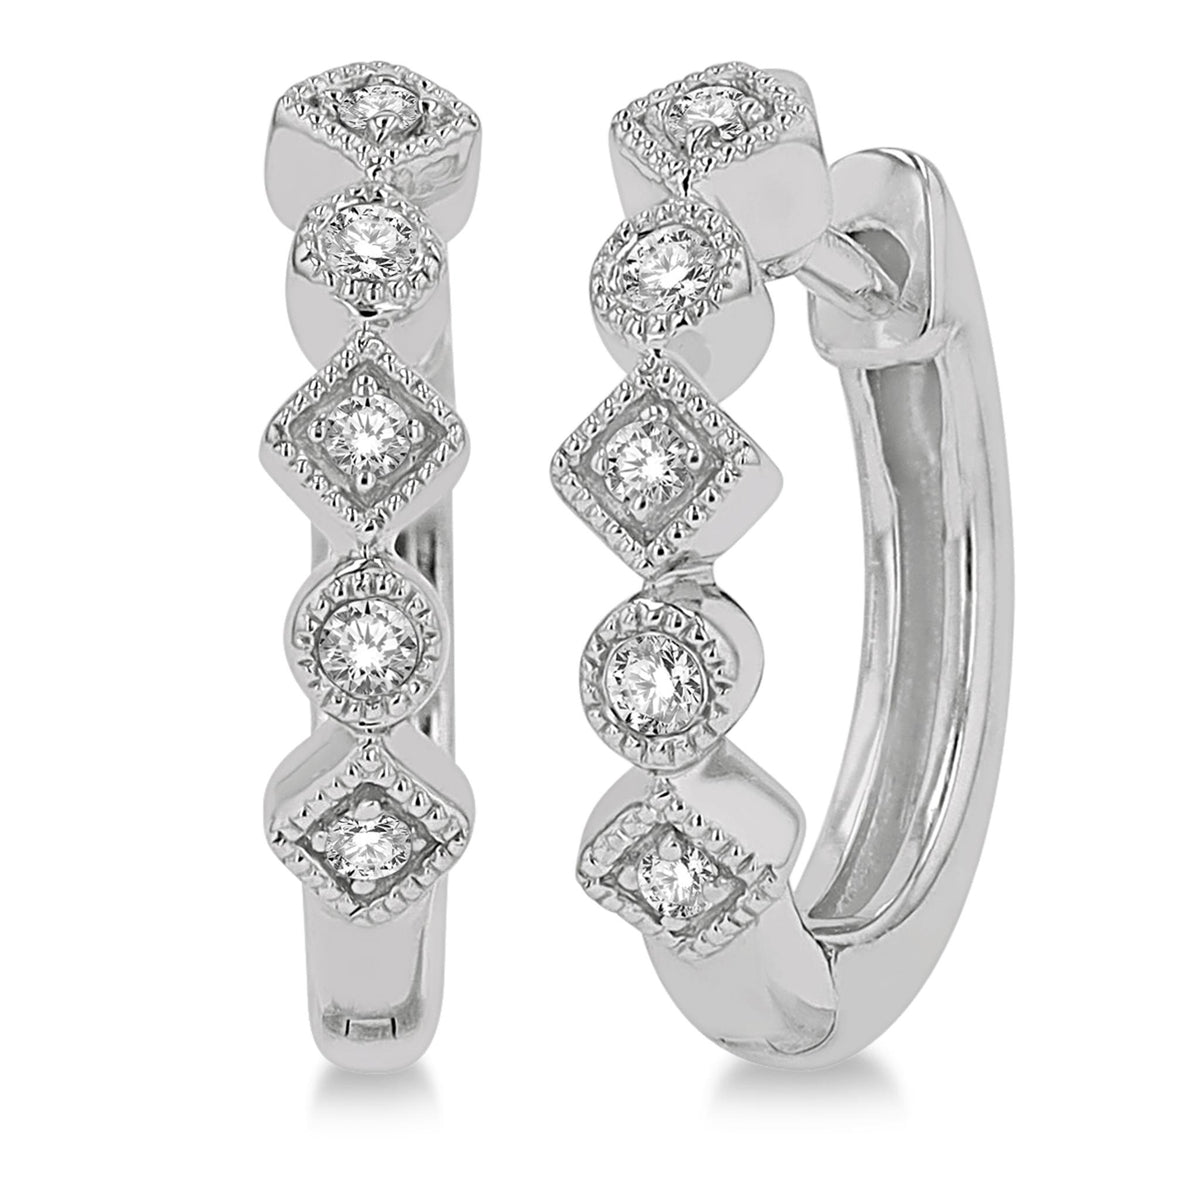 Lasker Petites-10Kt White Gold Round Hoop Earrings with 0.10cttw Natural Diamonds